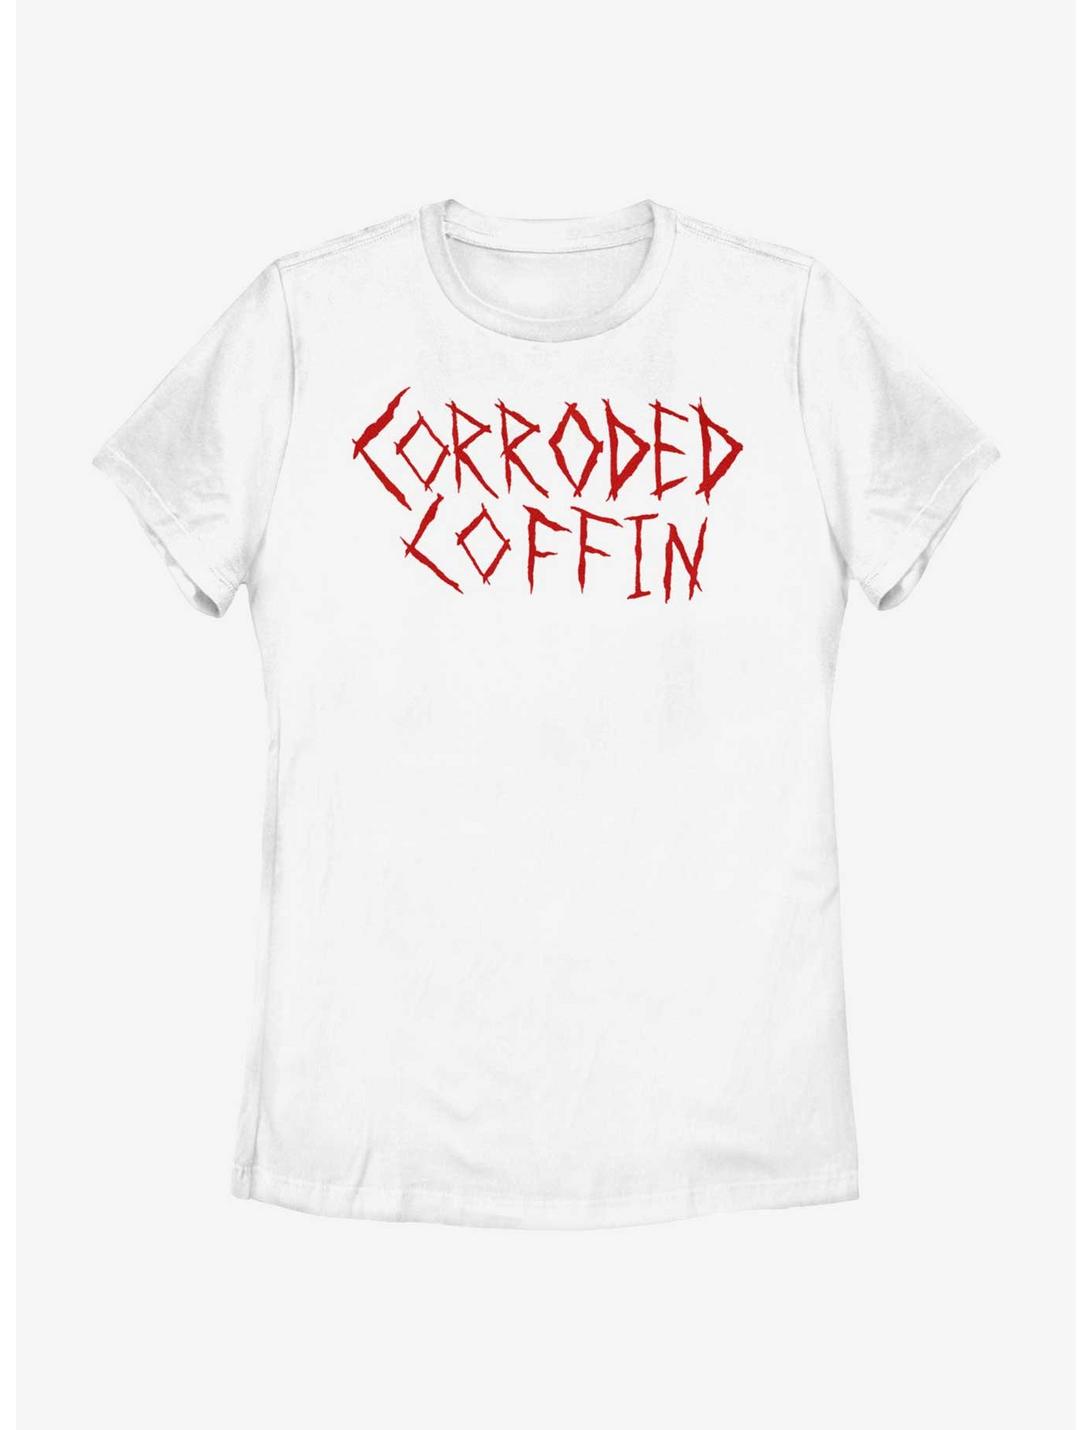 Stranger Things Corroded Coffin Womens T-Shirt, WHITE, hi-res